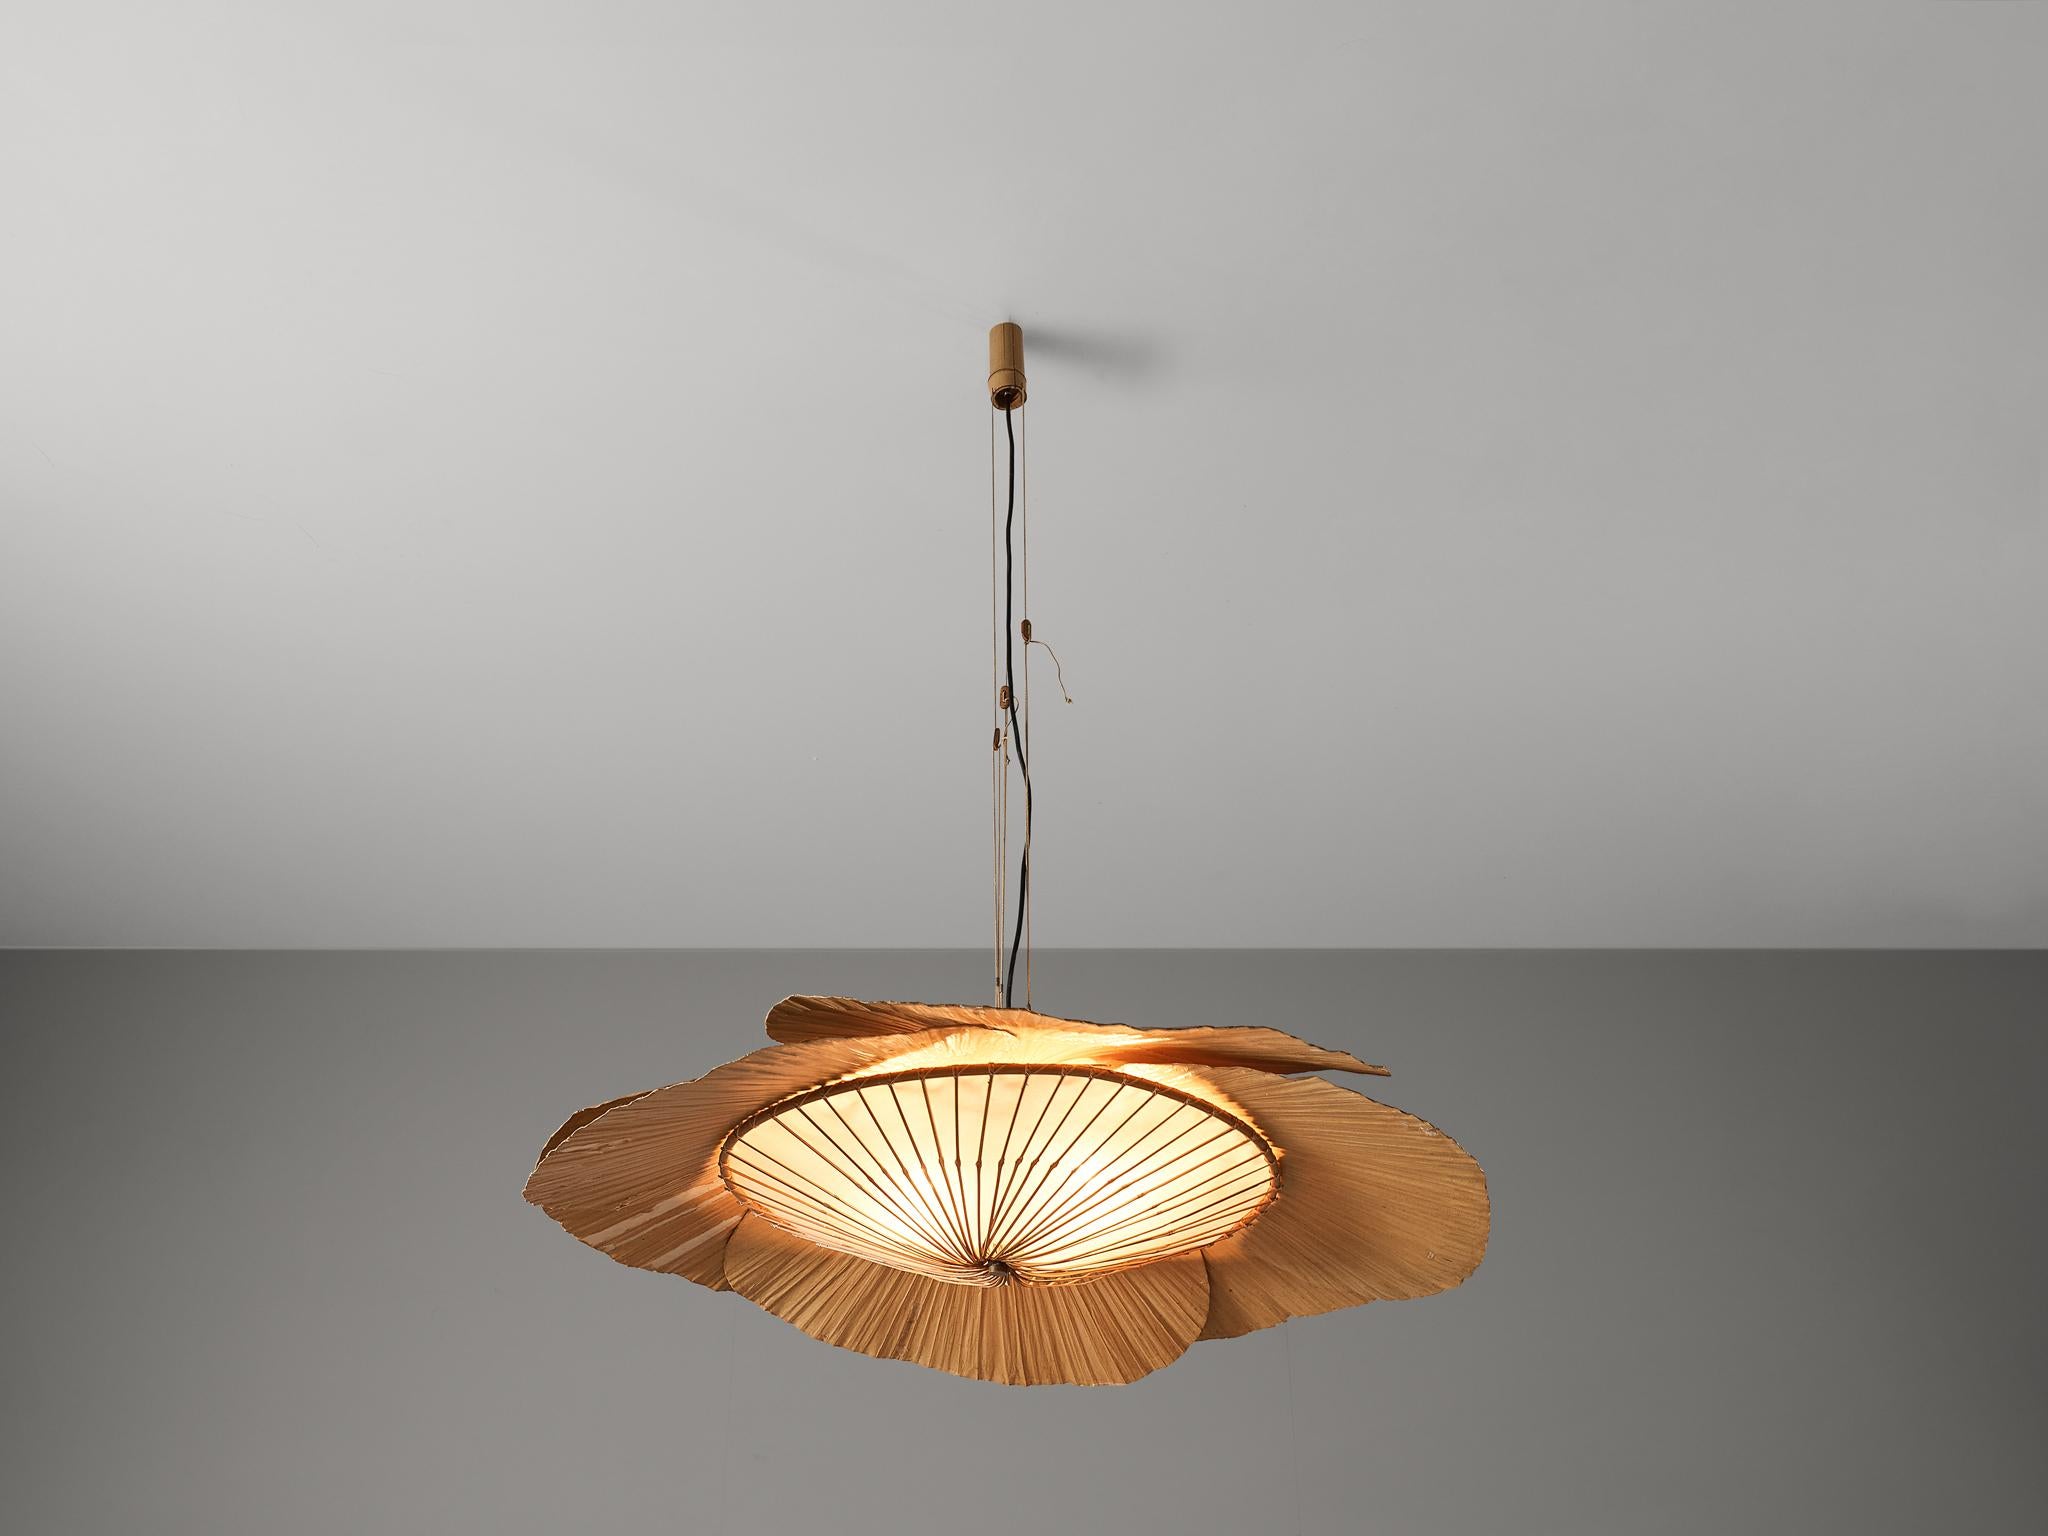 Ingo Maurer for Design M, chandelier, model 'Uchiwa', rice paper, bamboo, Germany, 1970s.

This highly sought-after and rare chandelier by Ingo Maurer is designed for his own lighting company Design M. 'Uchiwa', literally means 'fan' in Japanese